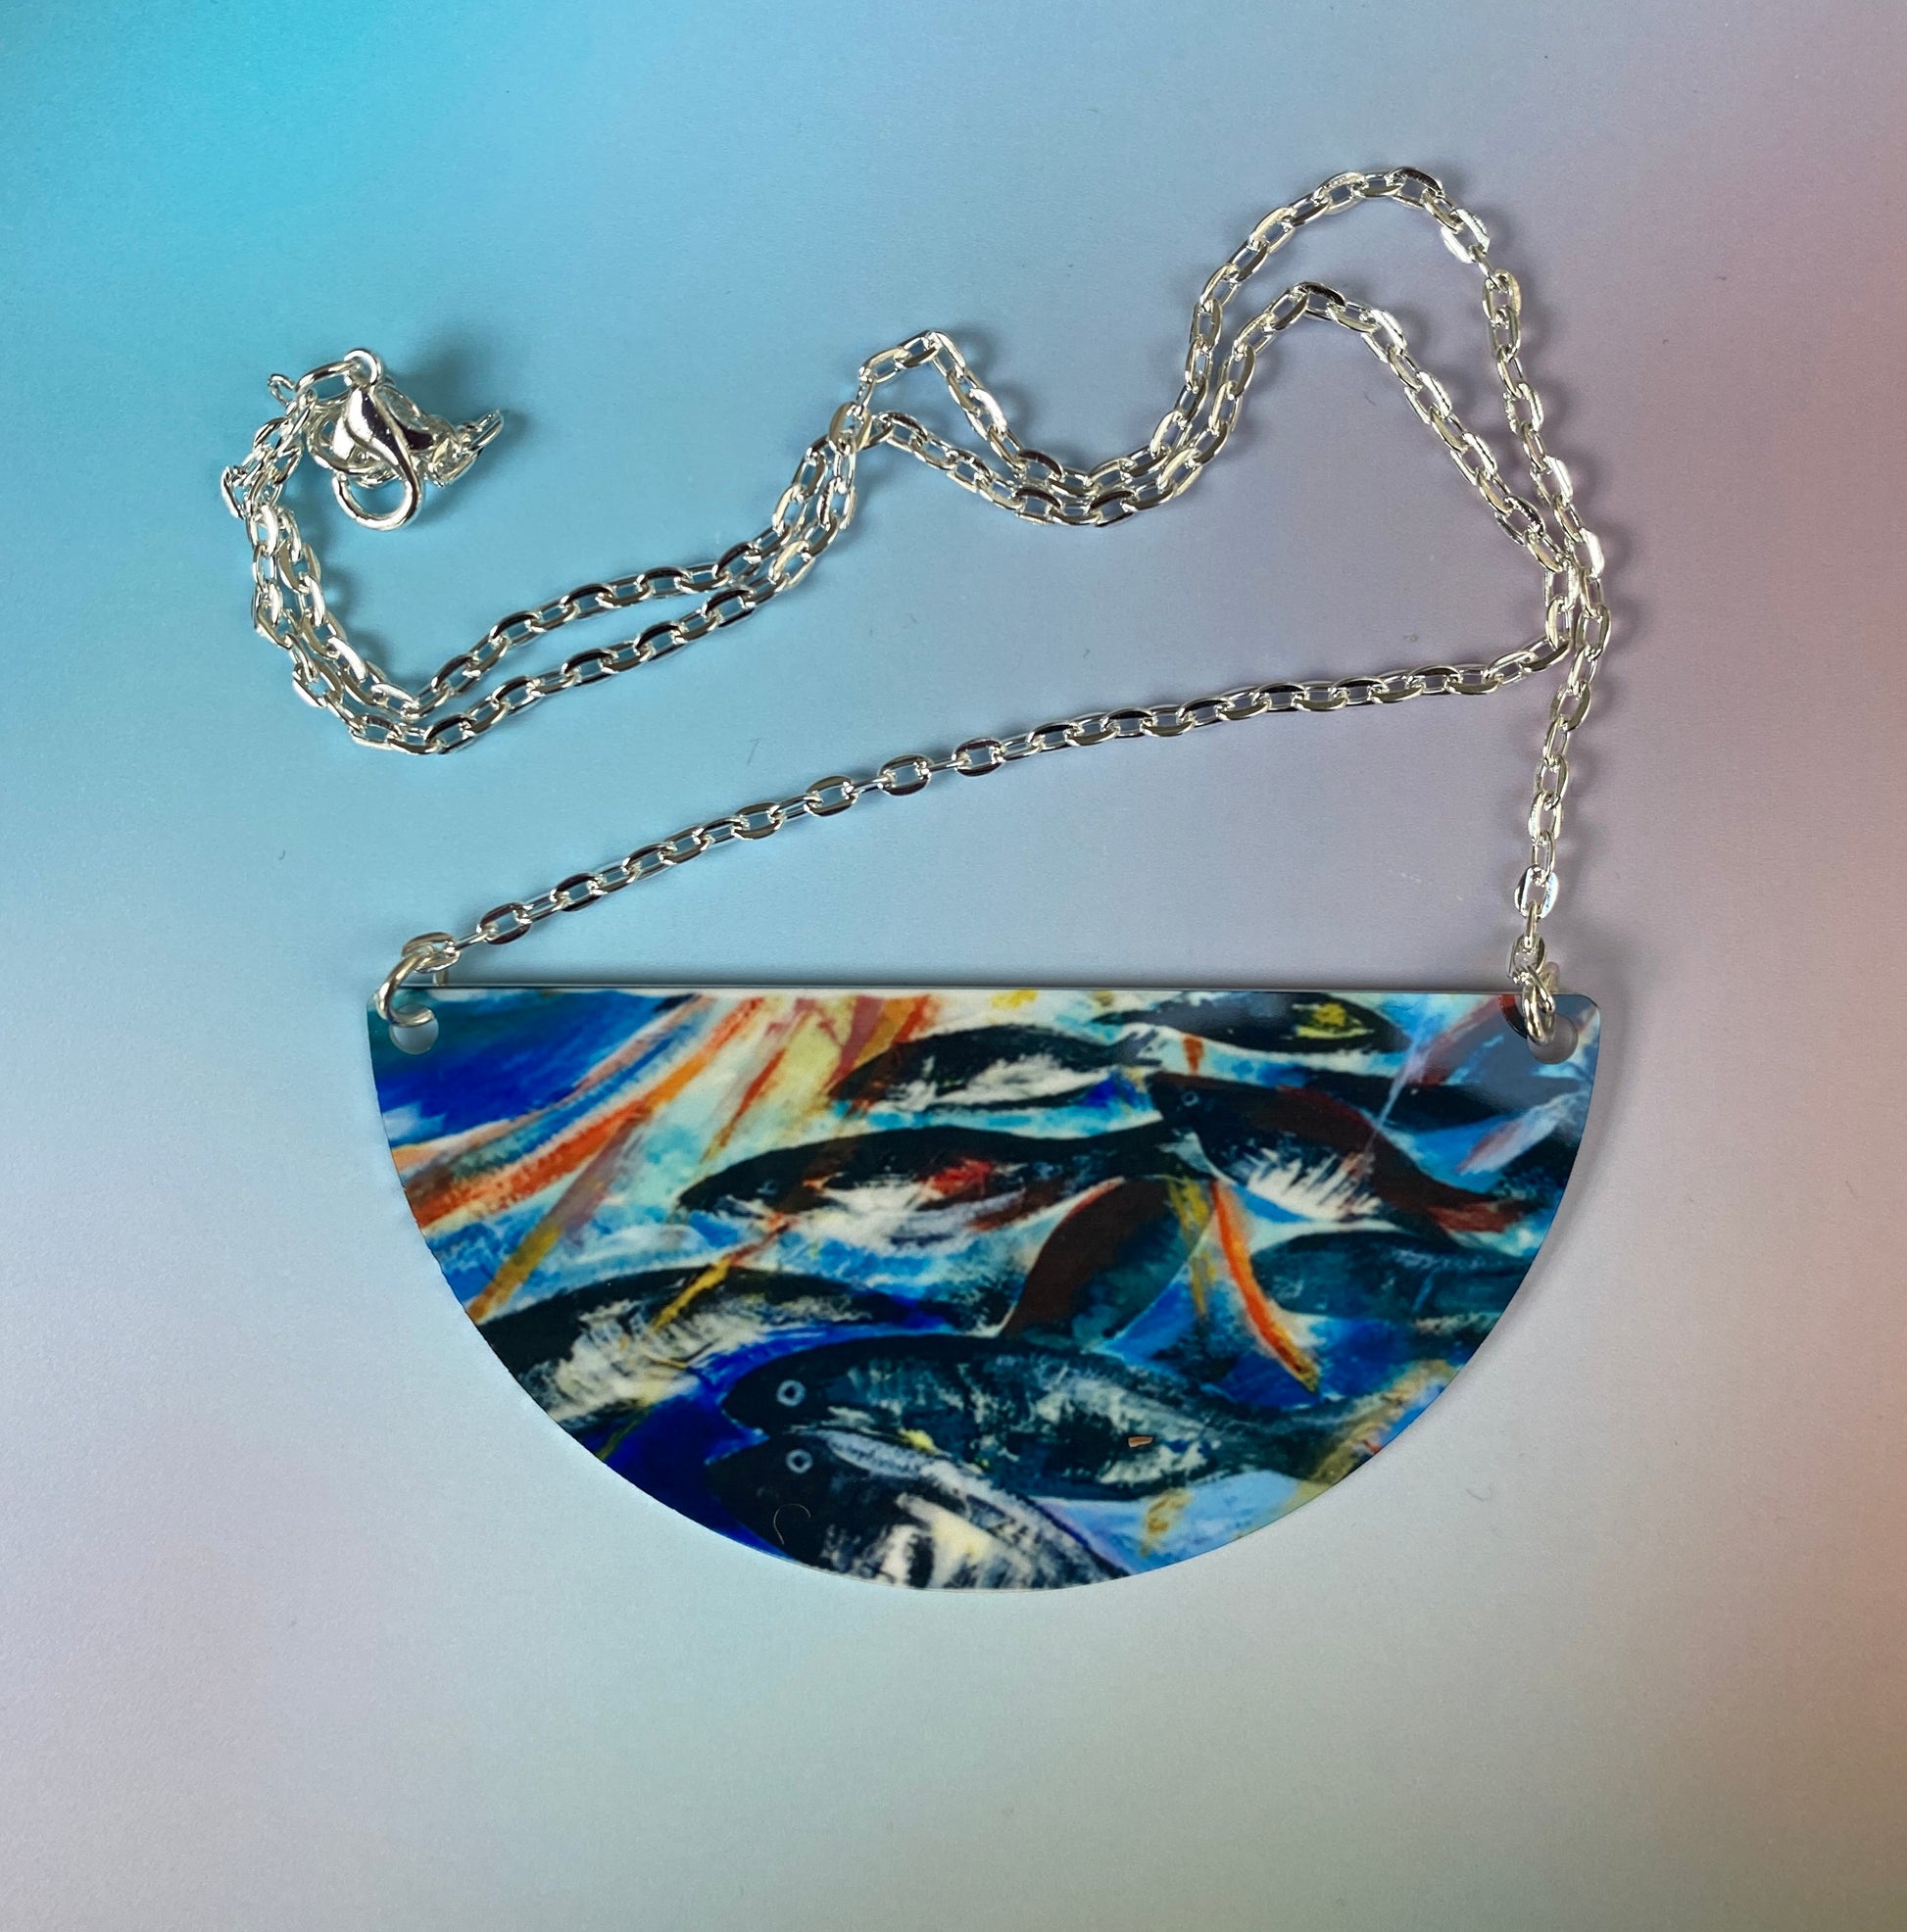 A necklace with Silver darlings design by Orkney artist Jane Glue, Scotland